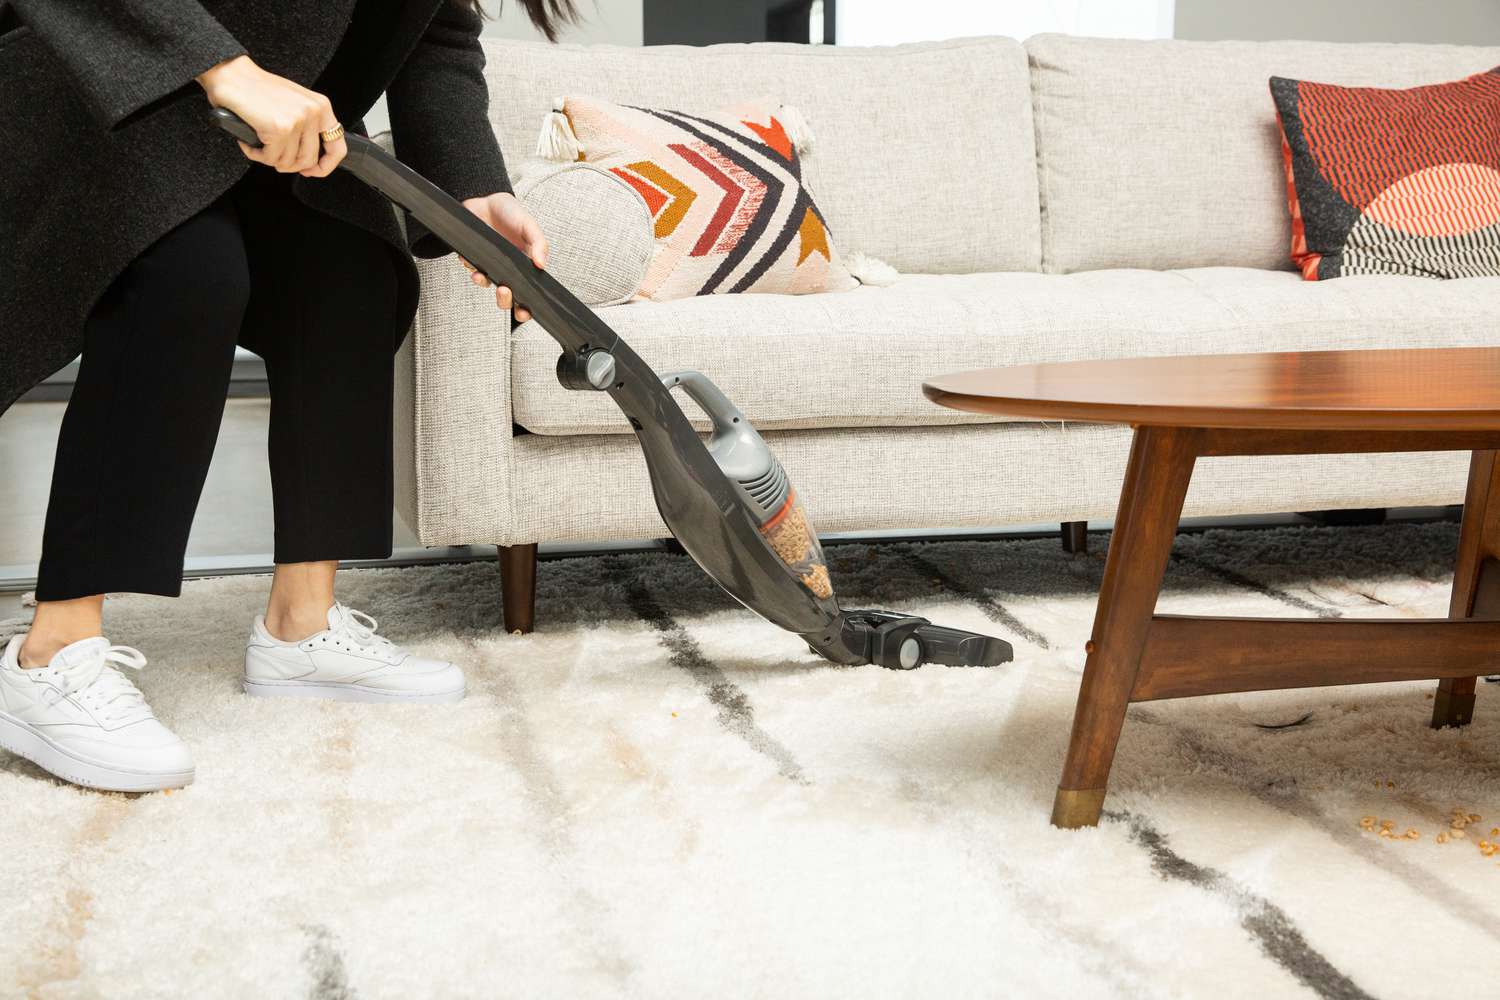 How To Make A Vacuum Cleaner Quieter